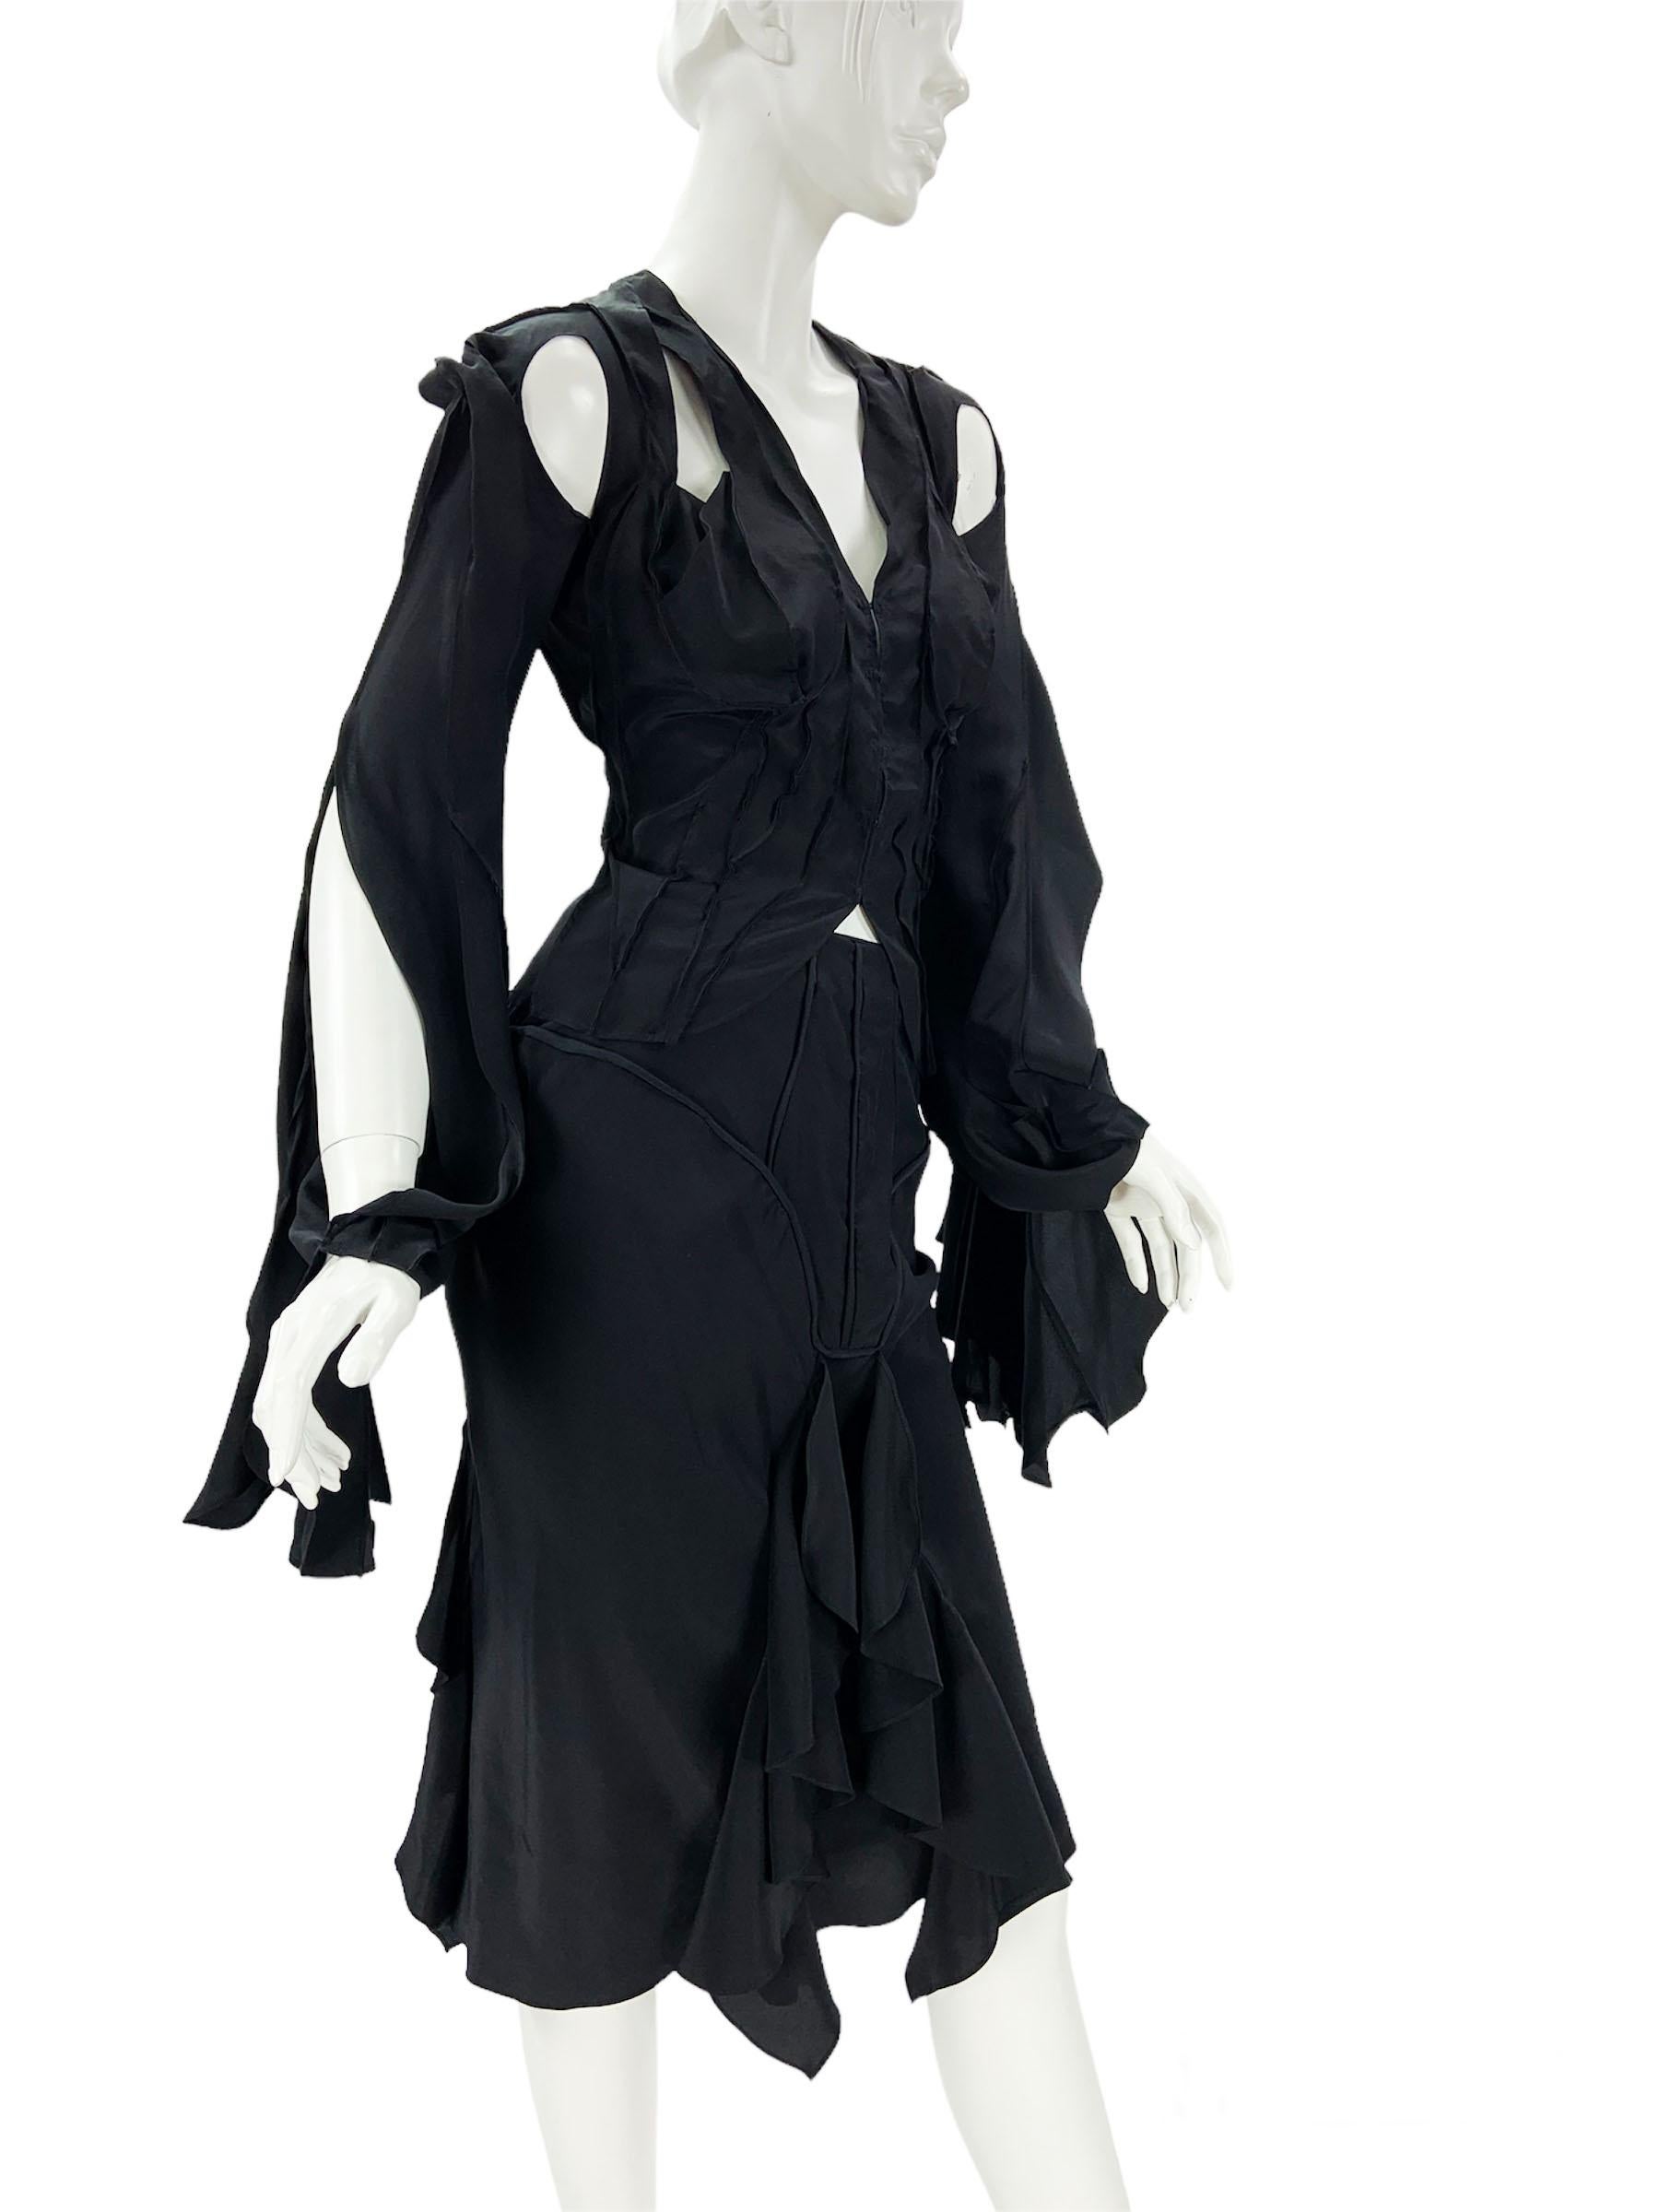 Tom Ford for Yves Saint Laurent Rive Gauche Skirt Suit
S/S 2003 Runway Collection - Look 9
French size 38 - US 6
100% Silk, Black Color.
Top - Cutout Details, Bell Sleeve, Hook and Eye Closure.
Length - 21 inch, Bust - 36